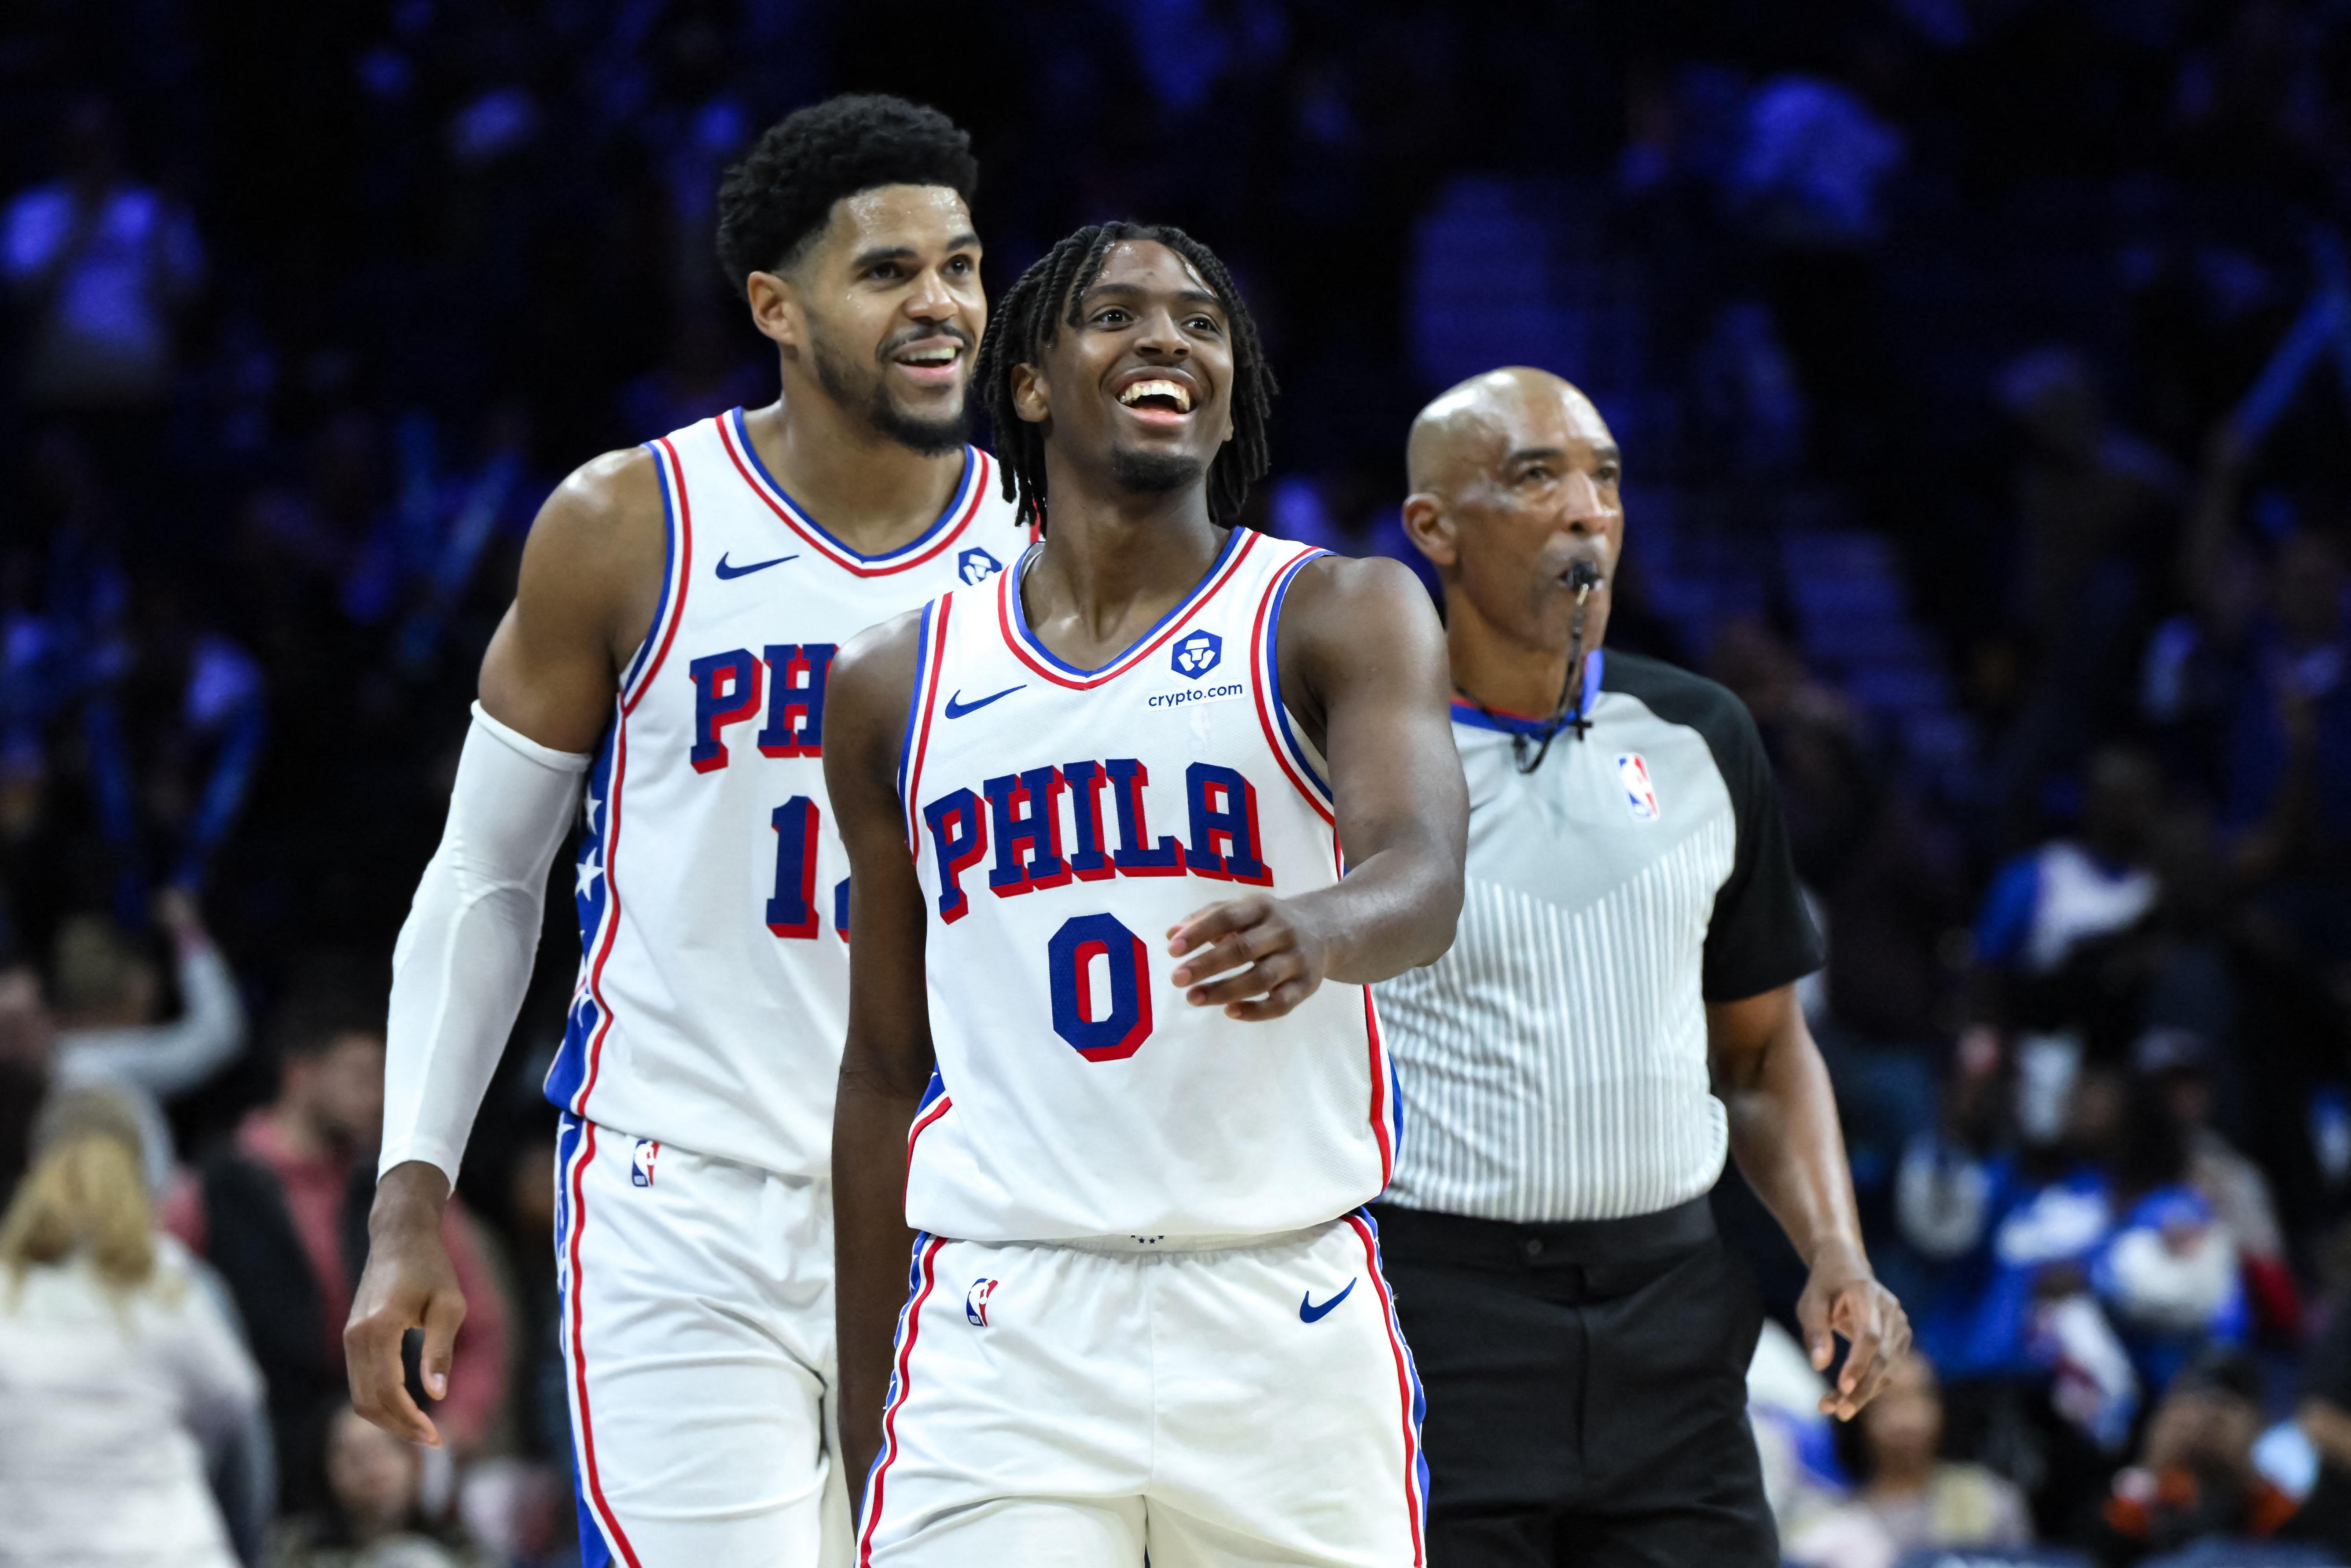 Philadelphia 76ers guard Tyrese Maxey is the NBA Most Improved Player, the league announced Tuesday evening.